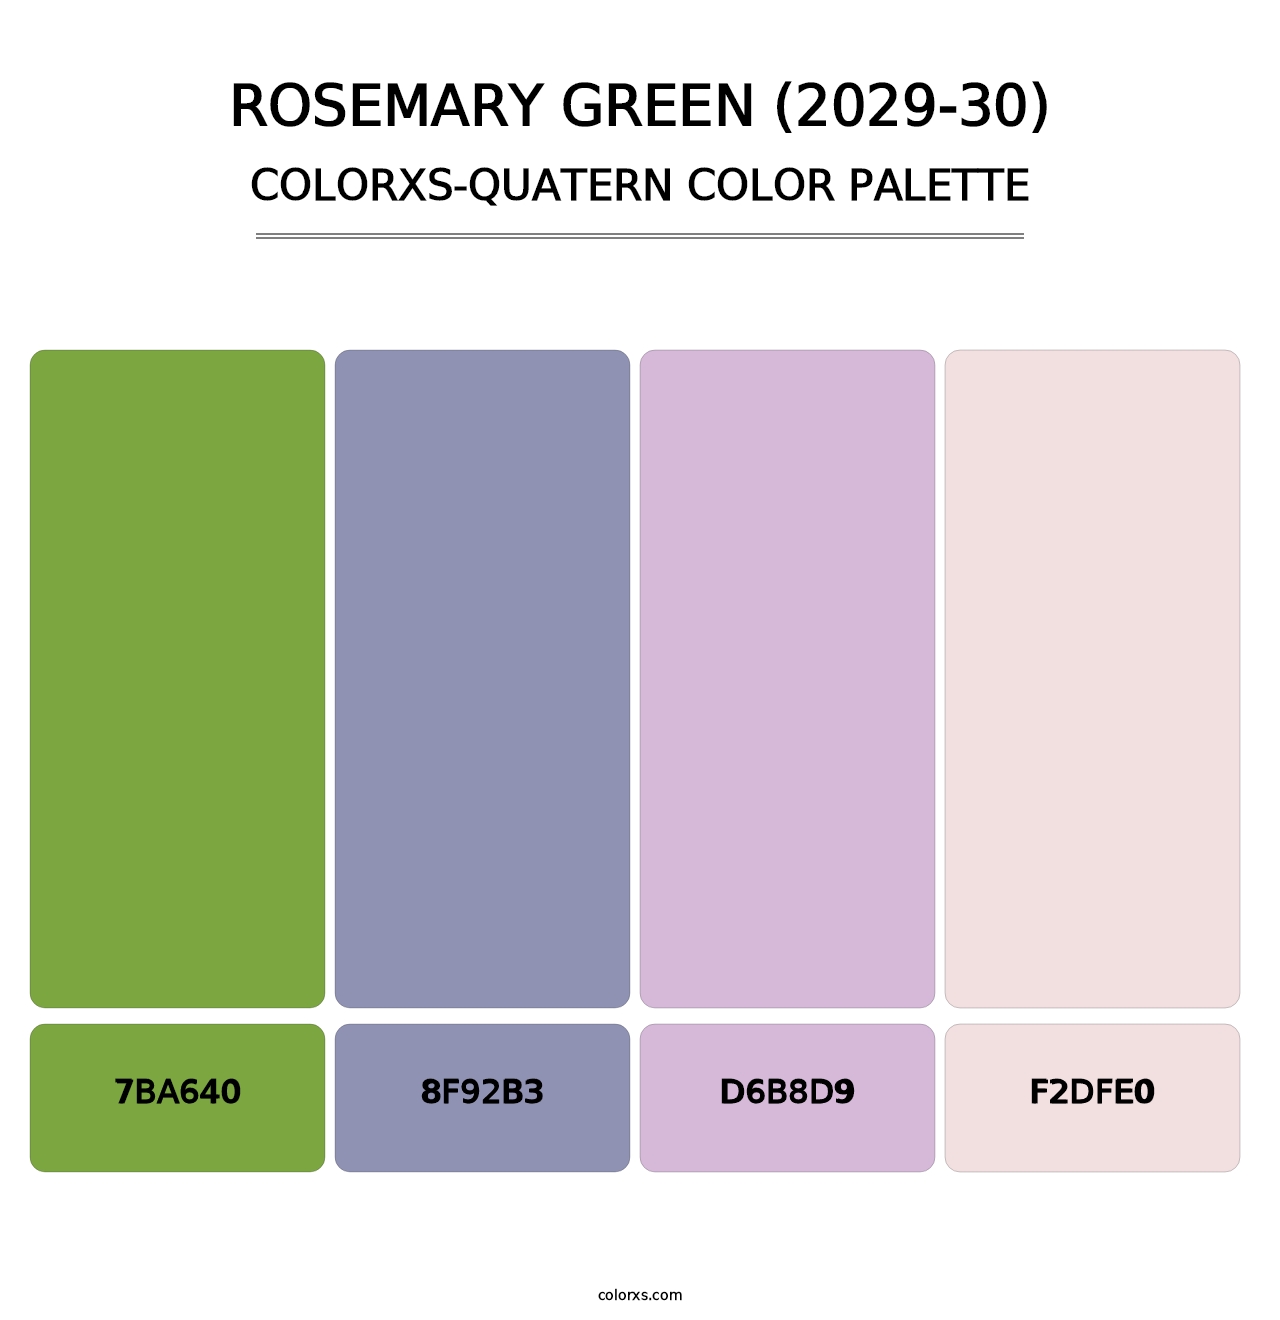 Rosemary Green (2029-30) - Colorxs Quatern Palette